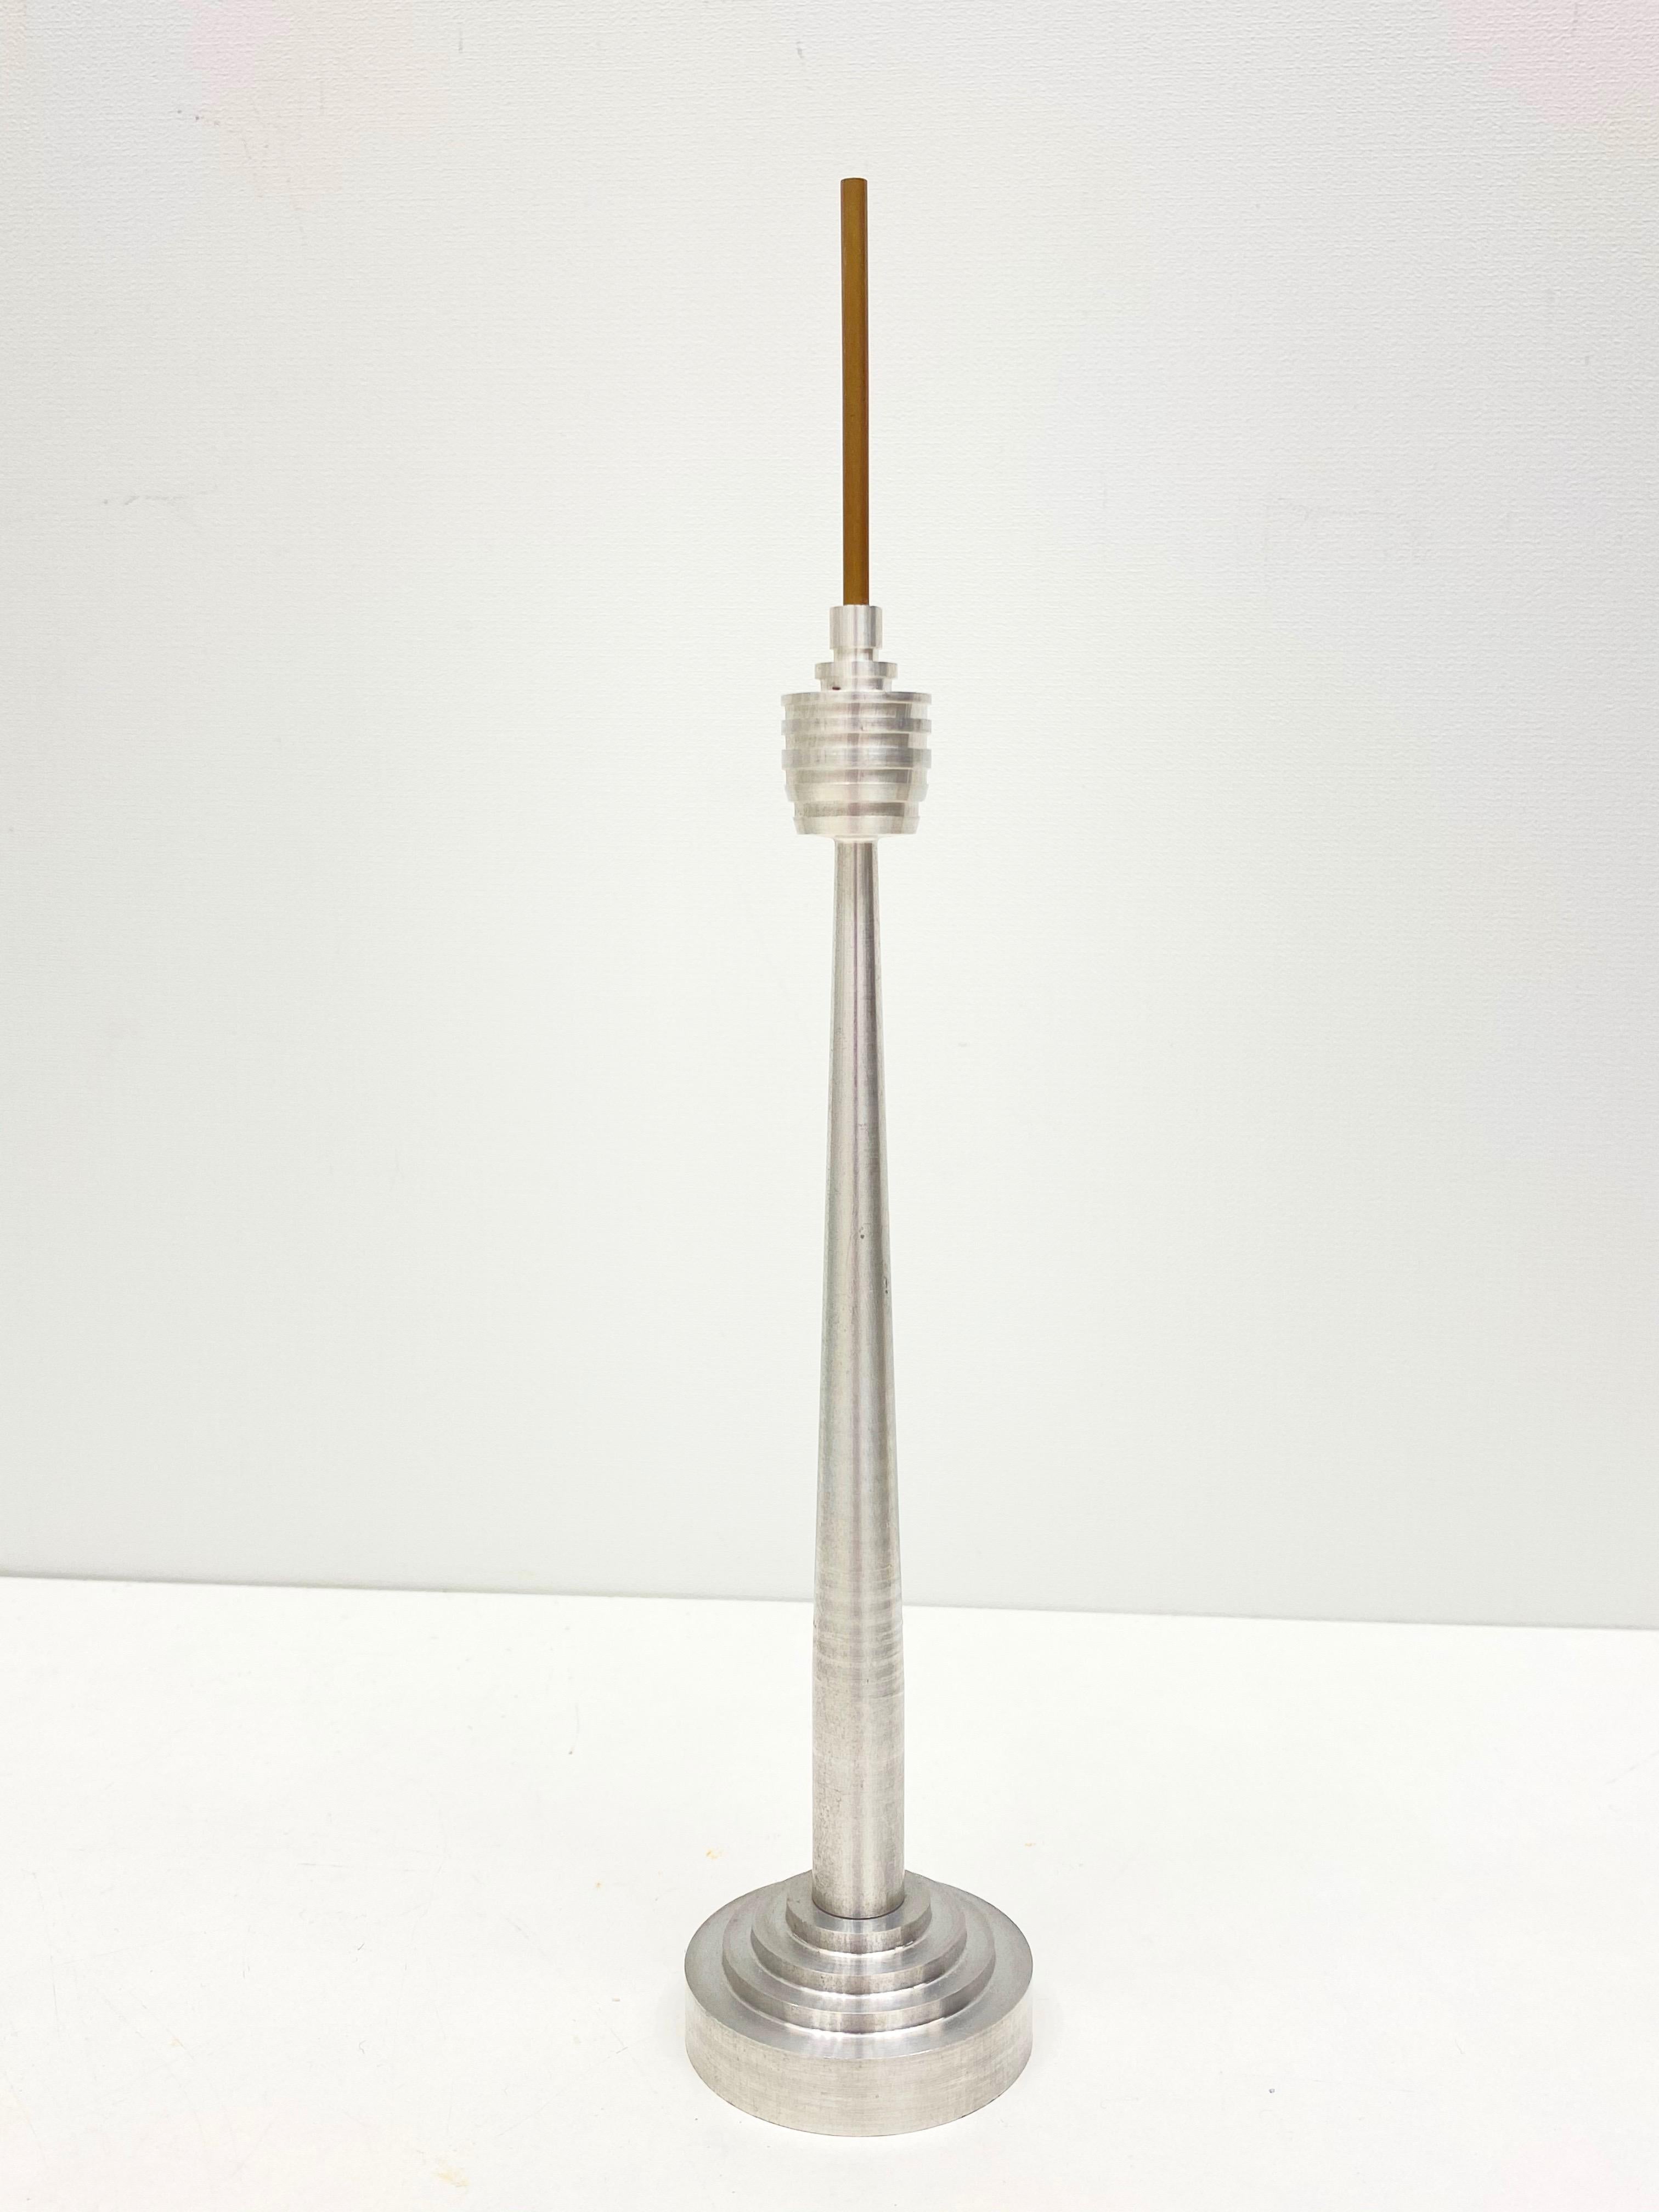 Scaled model of the Stuttgart television tower. Hand-spun in Aluminum, with brass top. A nice architectural sculpture for every living or men’s room. It has a beautiful patina due to the age.